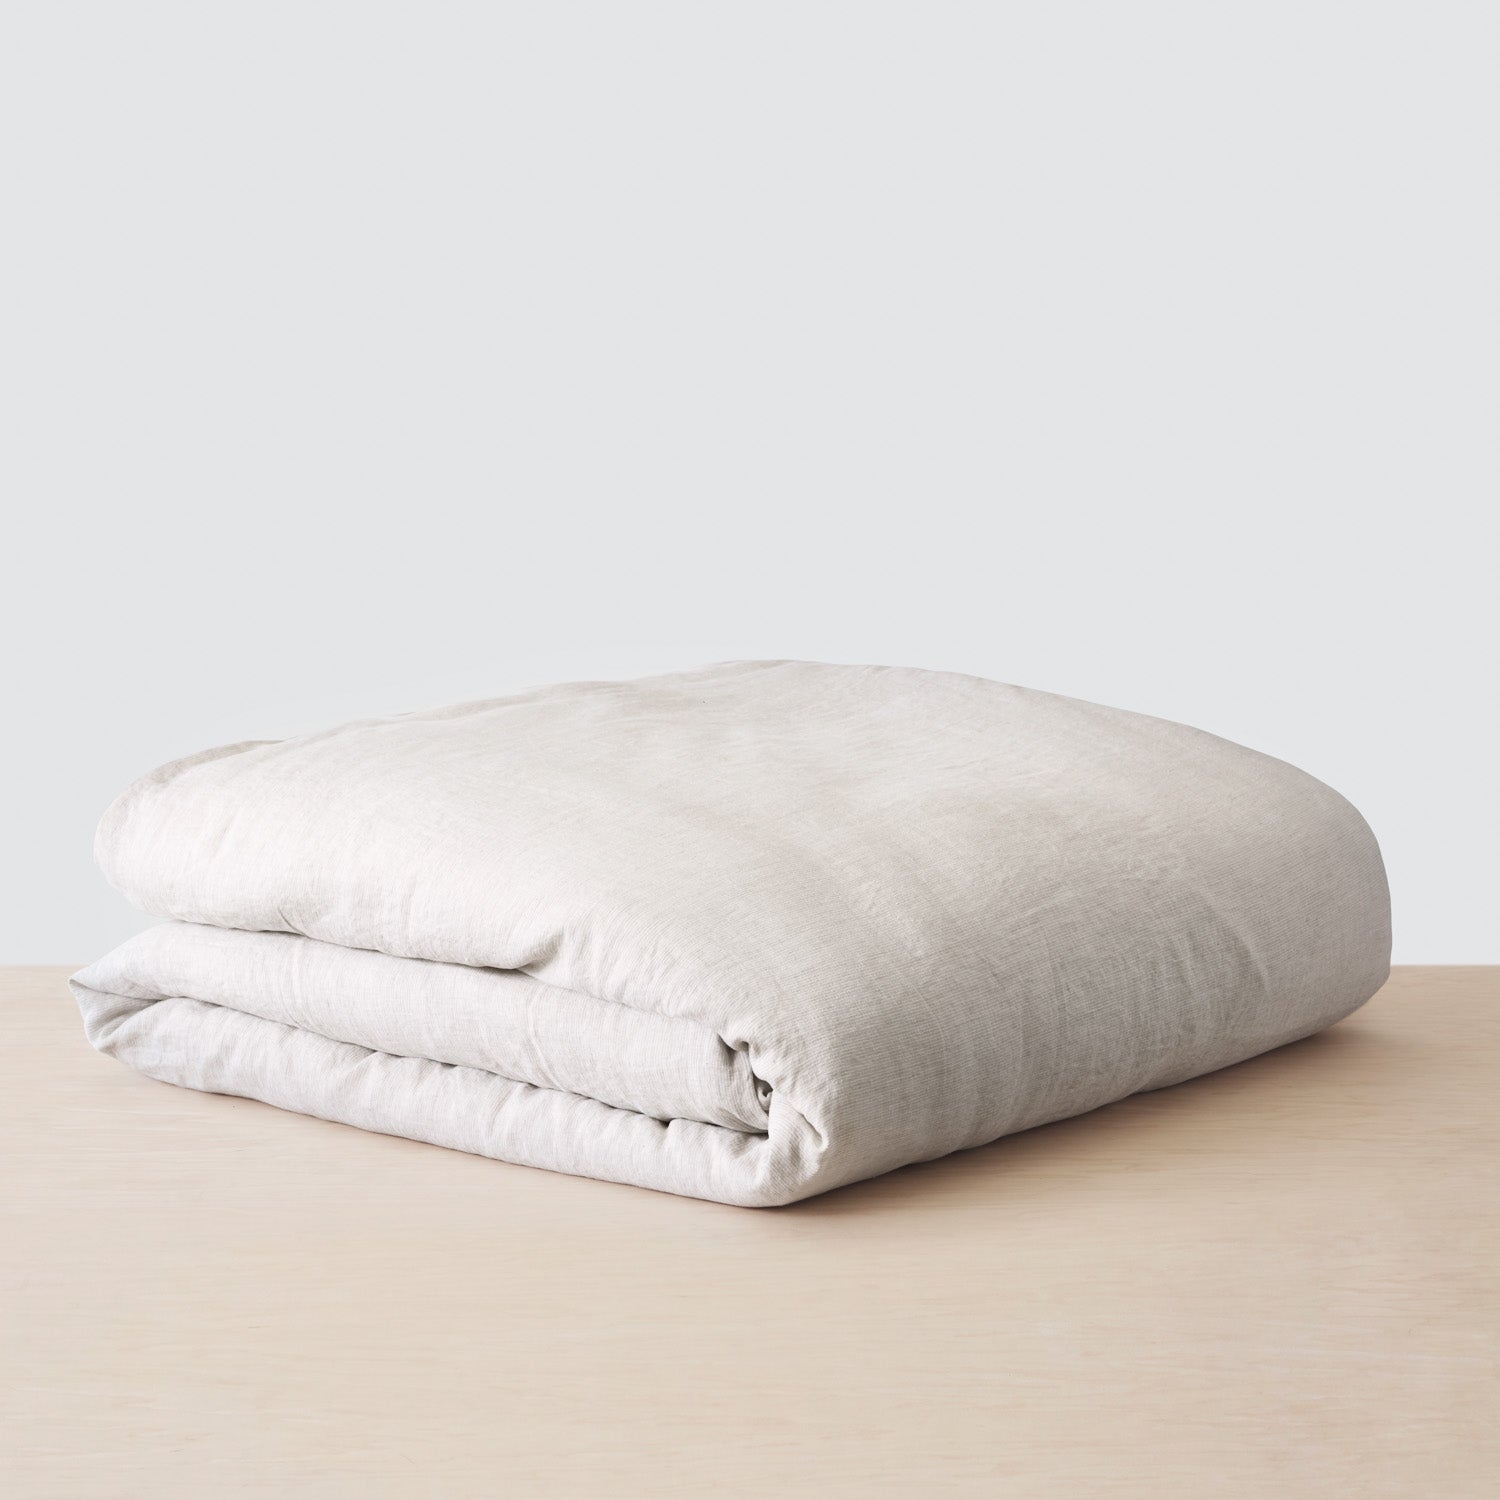 The Citizenry Stonewashed Linen Duvet Cover | King/Cal King | Duvet Only | Solid Sand - Image 8